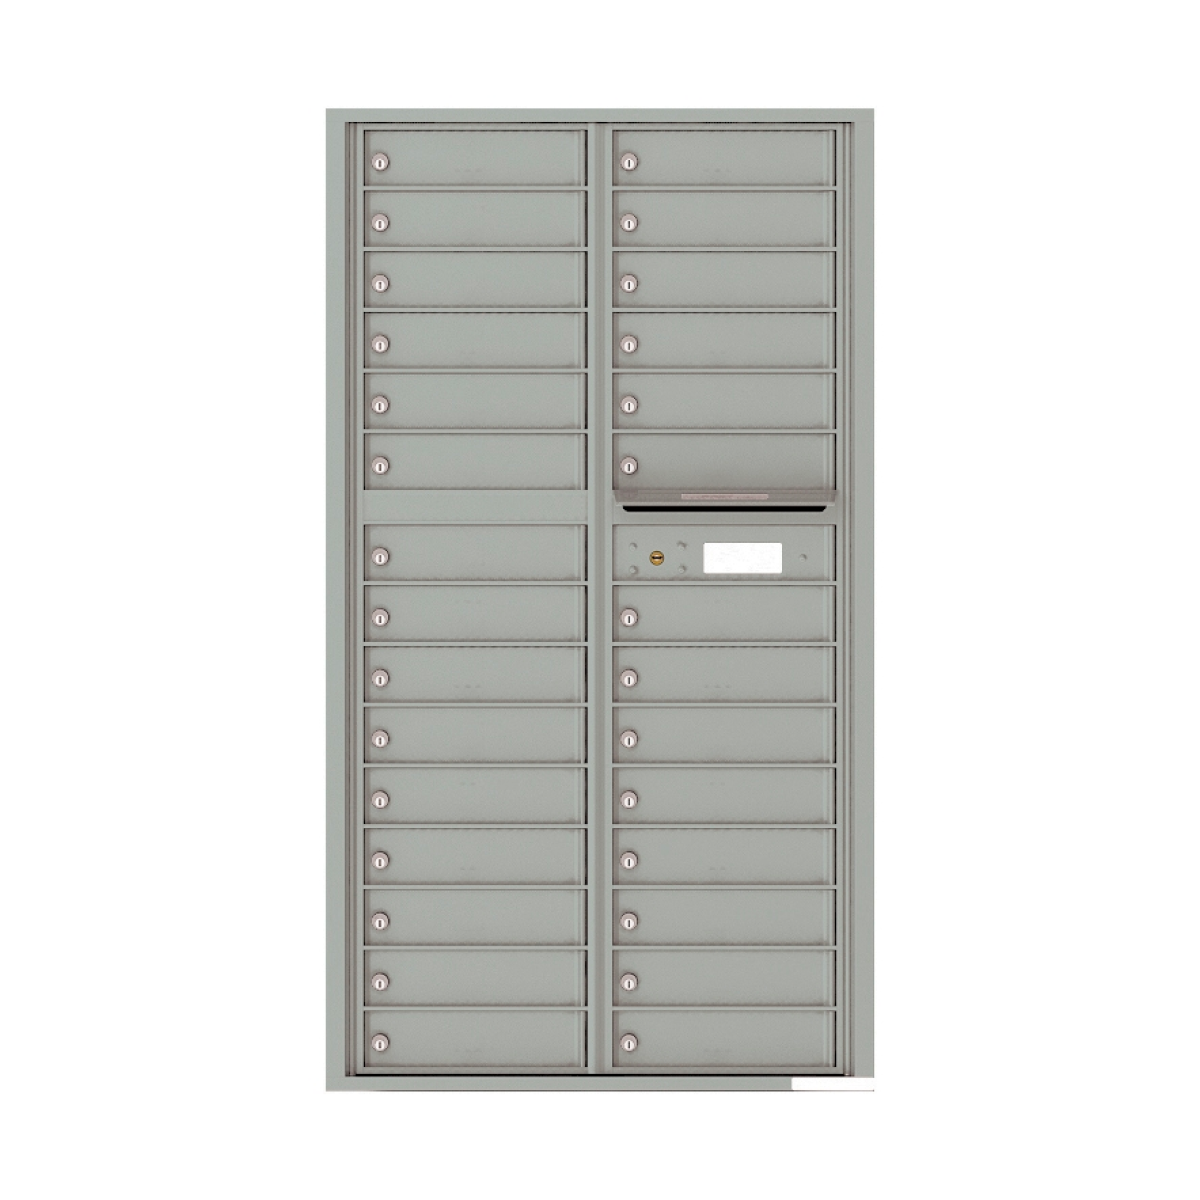 Recessed 4C Horizontal Mailbox – 29 Doors – Front Loading – 4C16D-29 Product Image